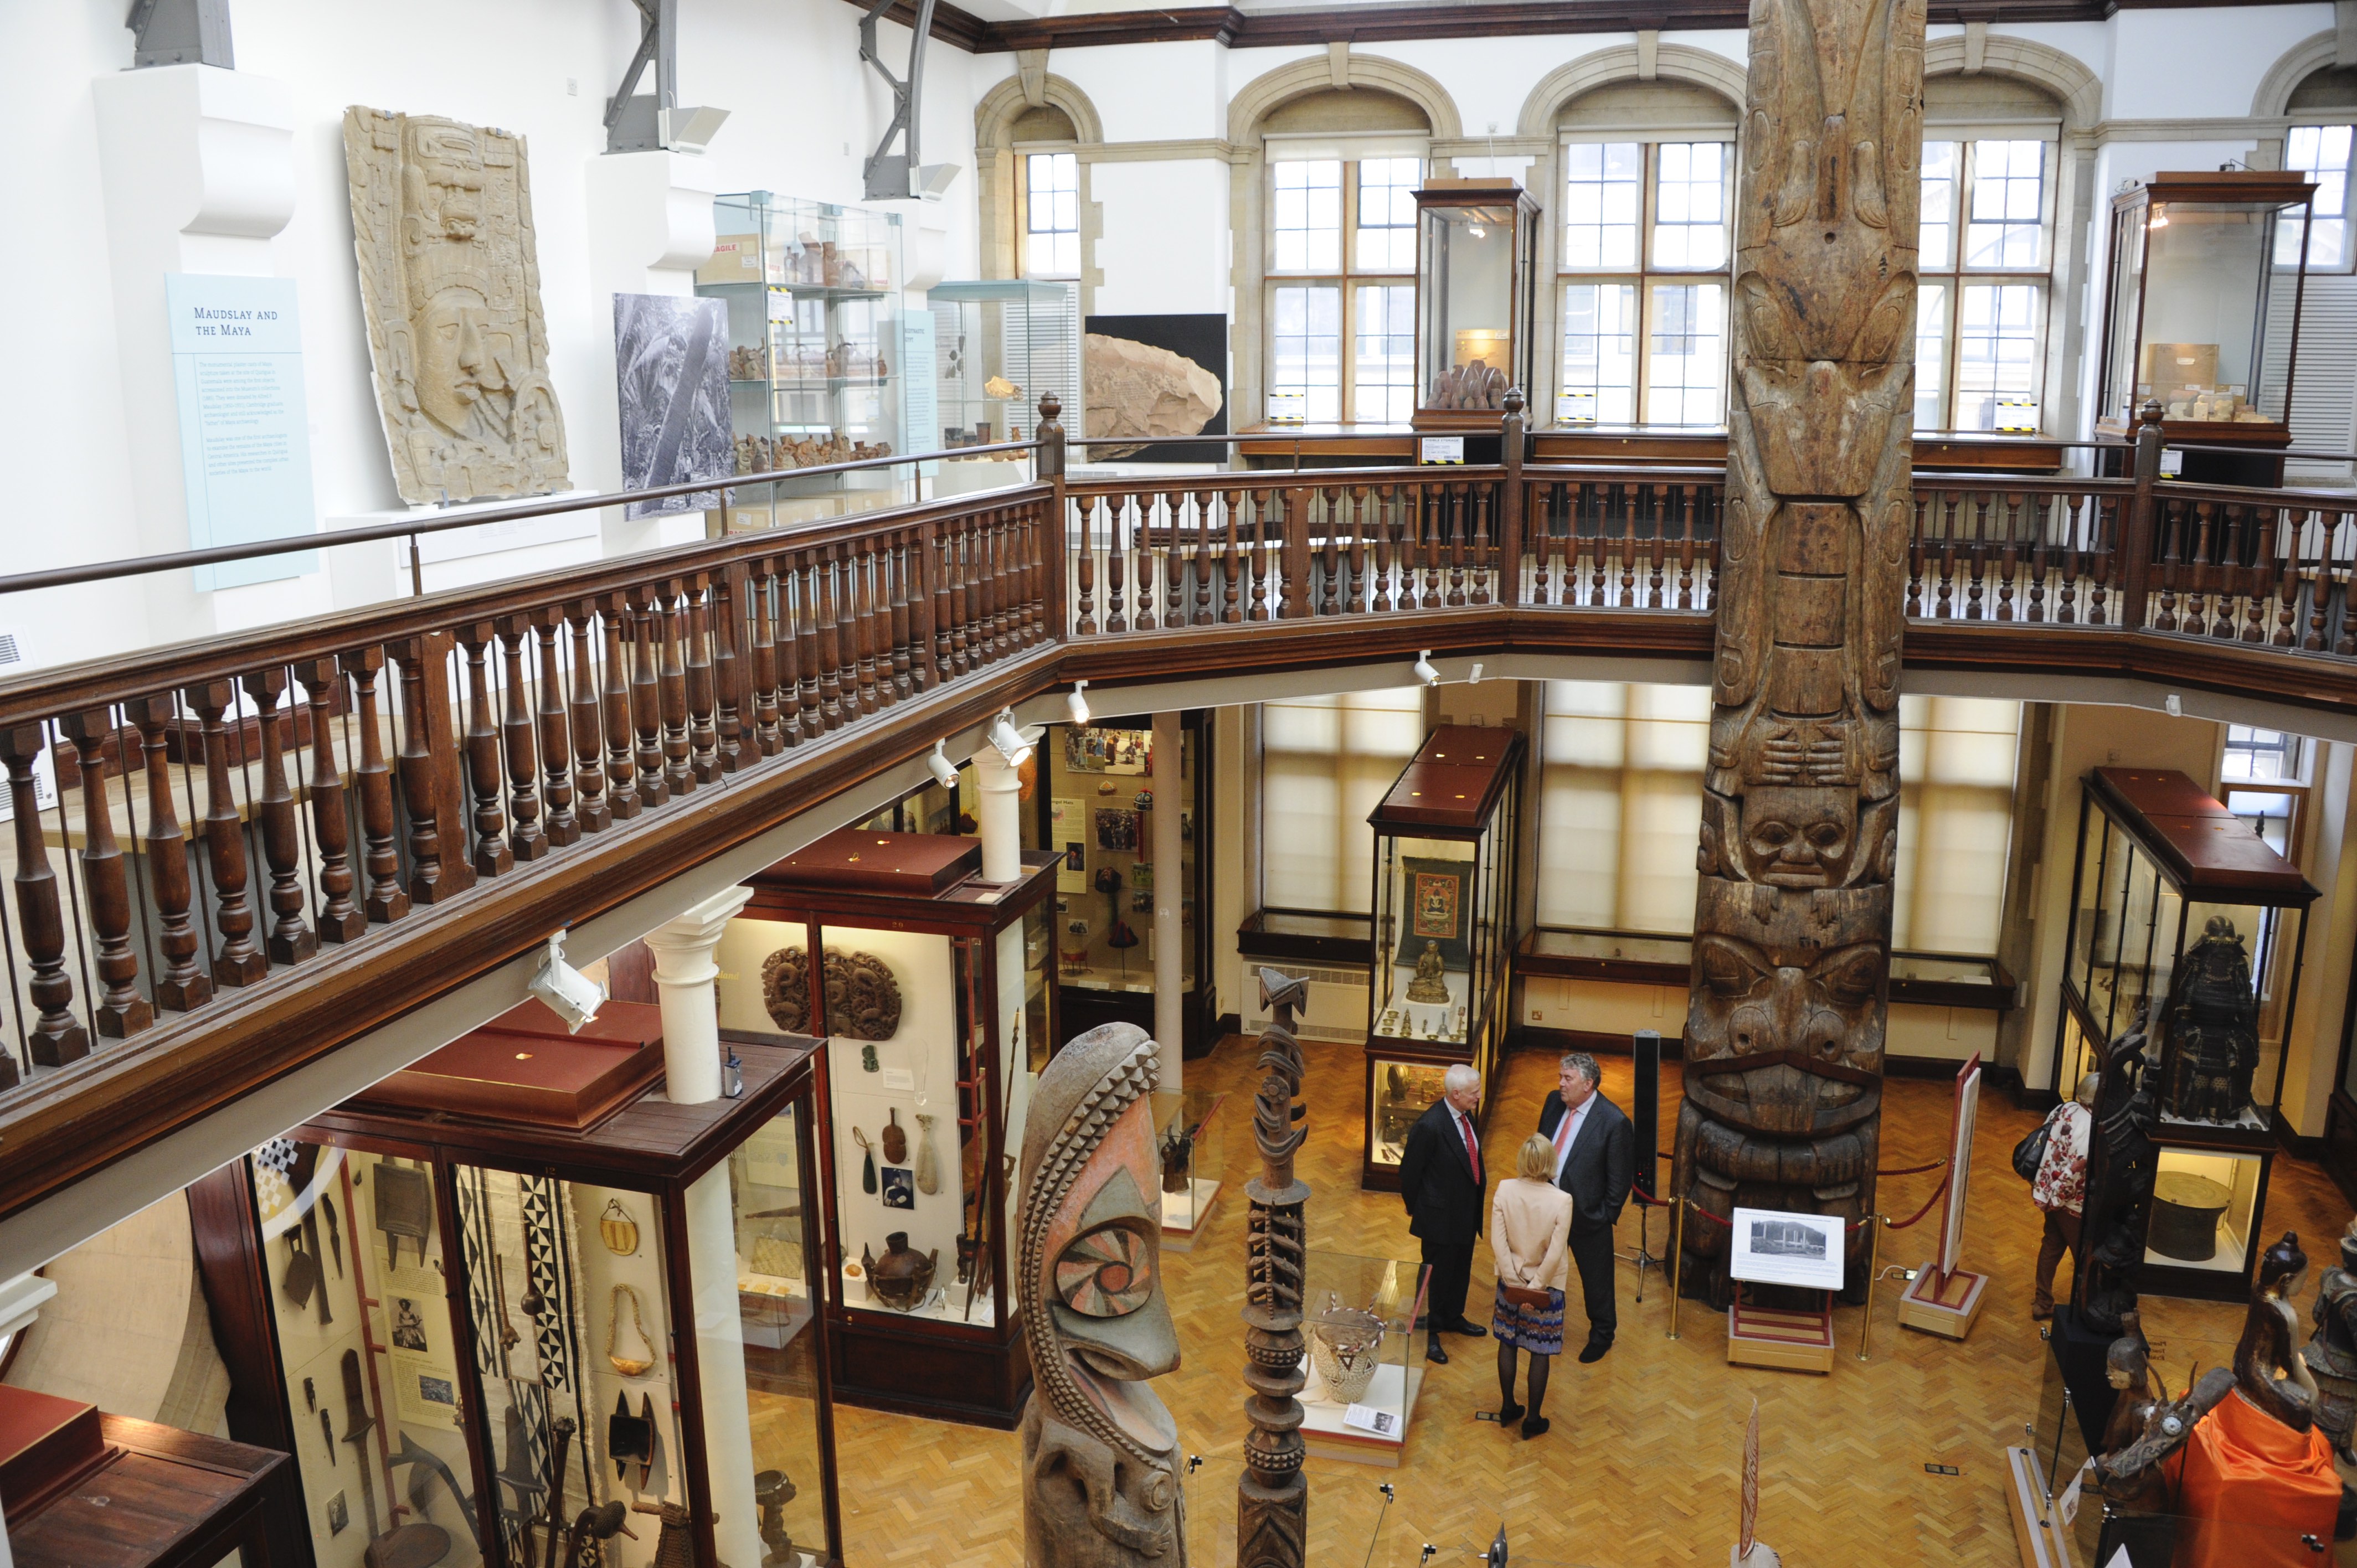 A view of the Maudslay Gallery from the Andrews Gallery